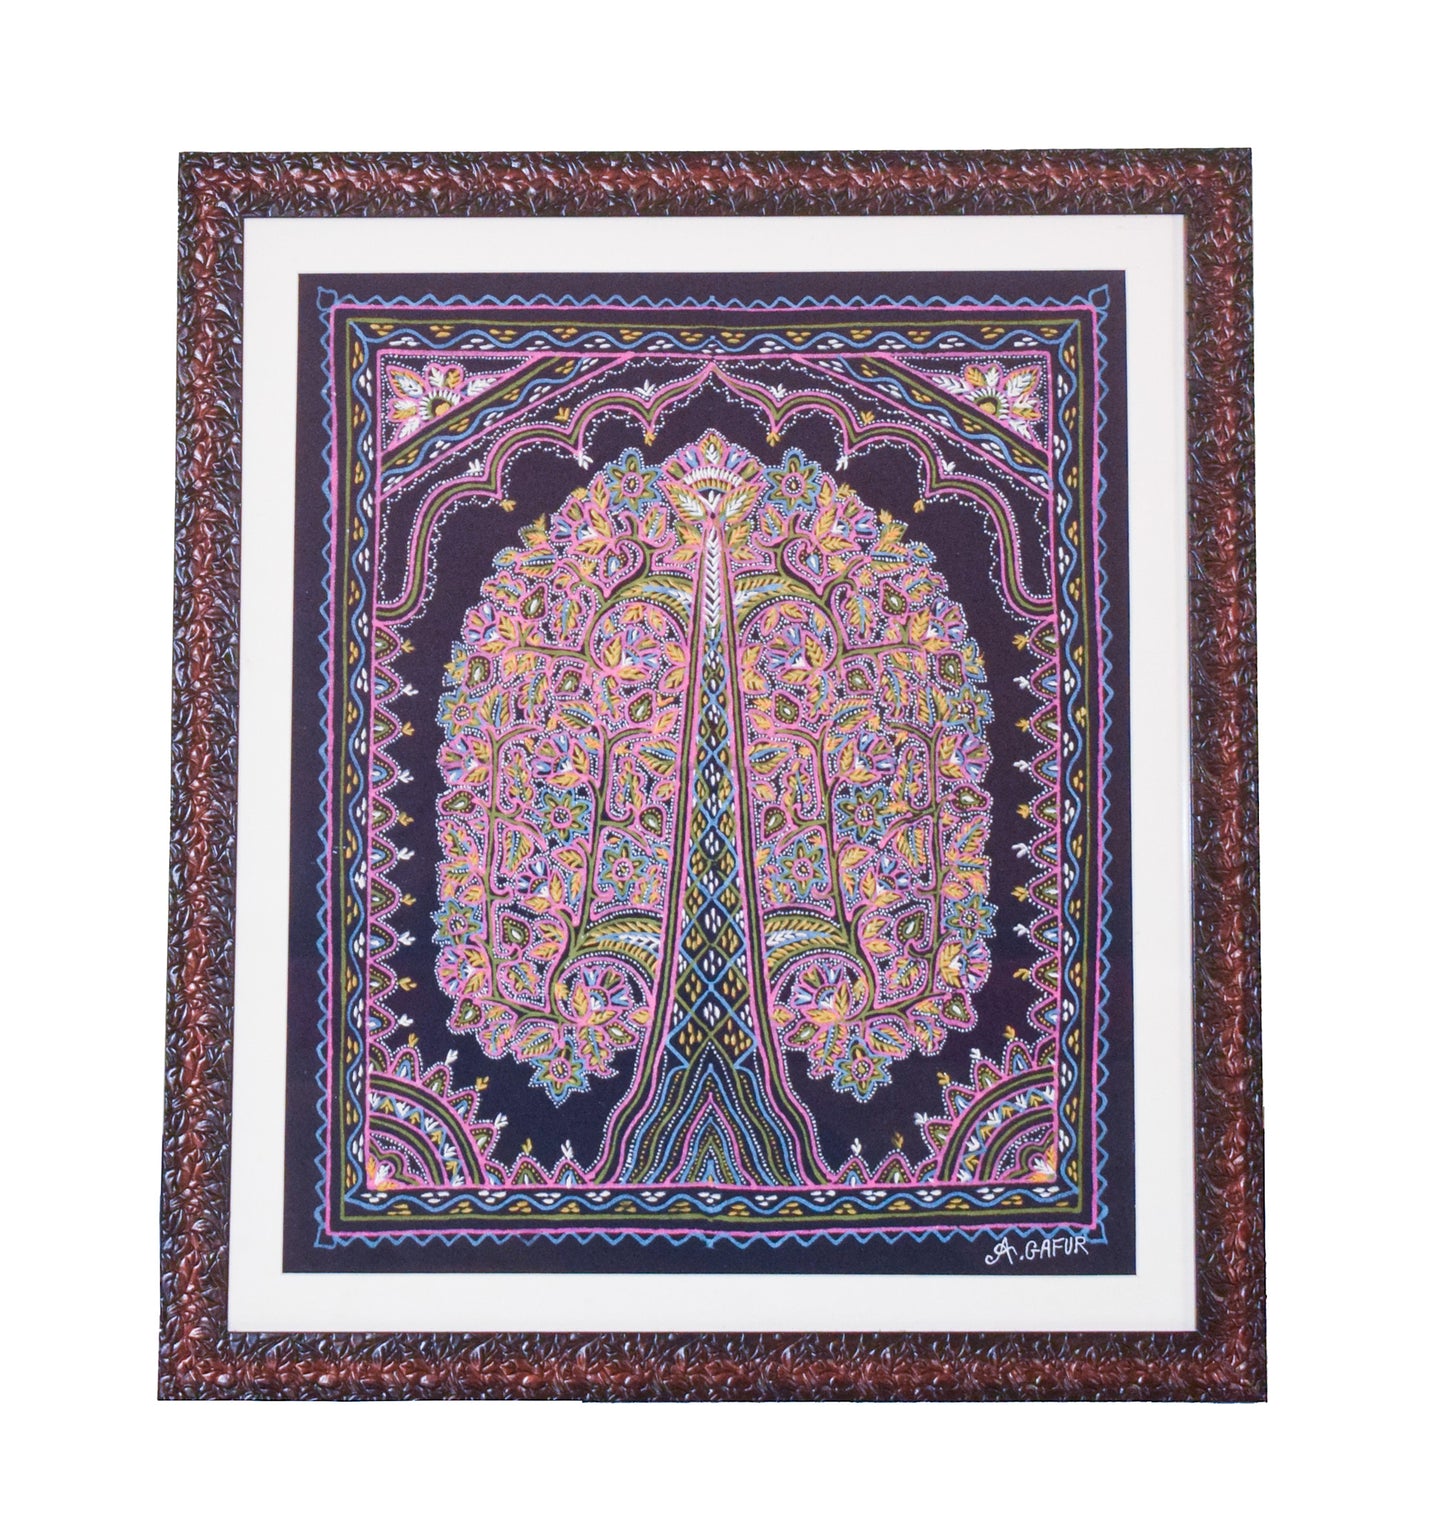 Rogan Painting Cotton Painting  With Frame  - 17 Inch Length    -  SKU : AG02A03A